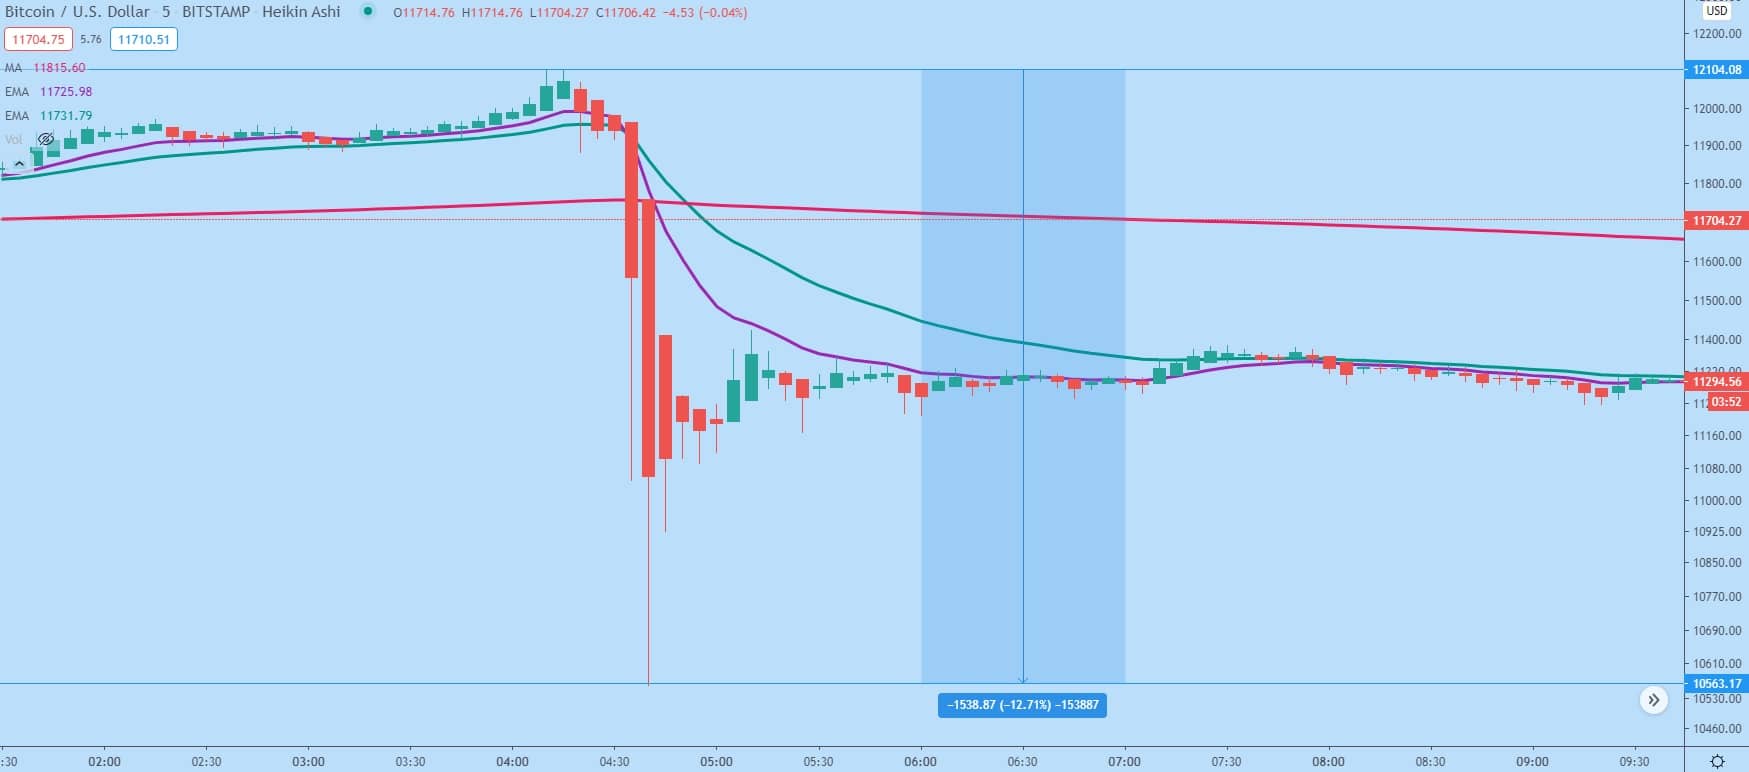 BTC/USD 5-min chart. Bitcoin fell over 12% in 10 minutes